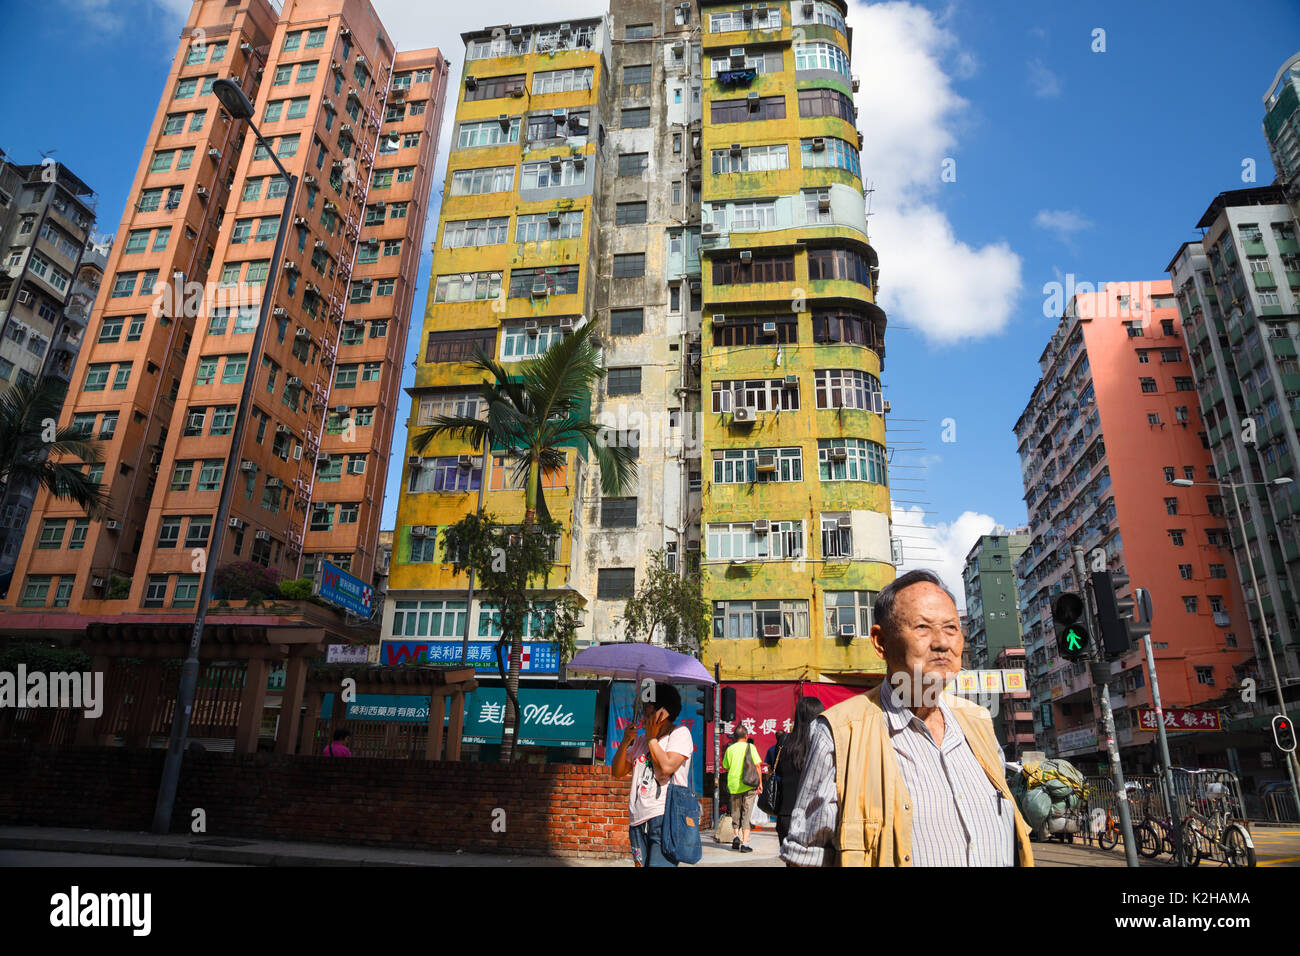 A man walks down the streets of Kowloon with typical buildings, Hong Kong Stock Photo